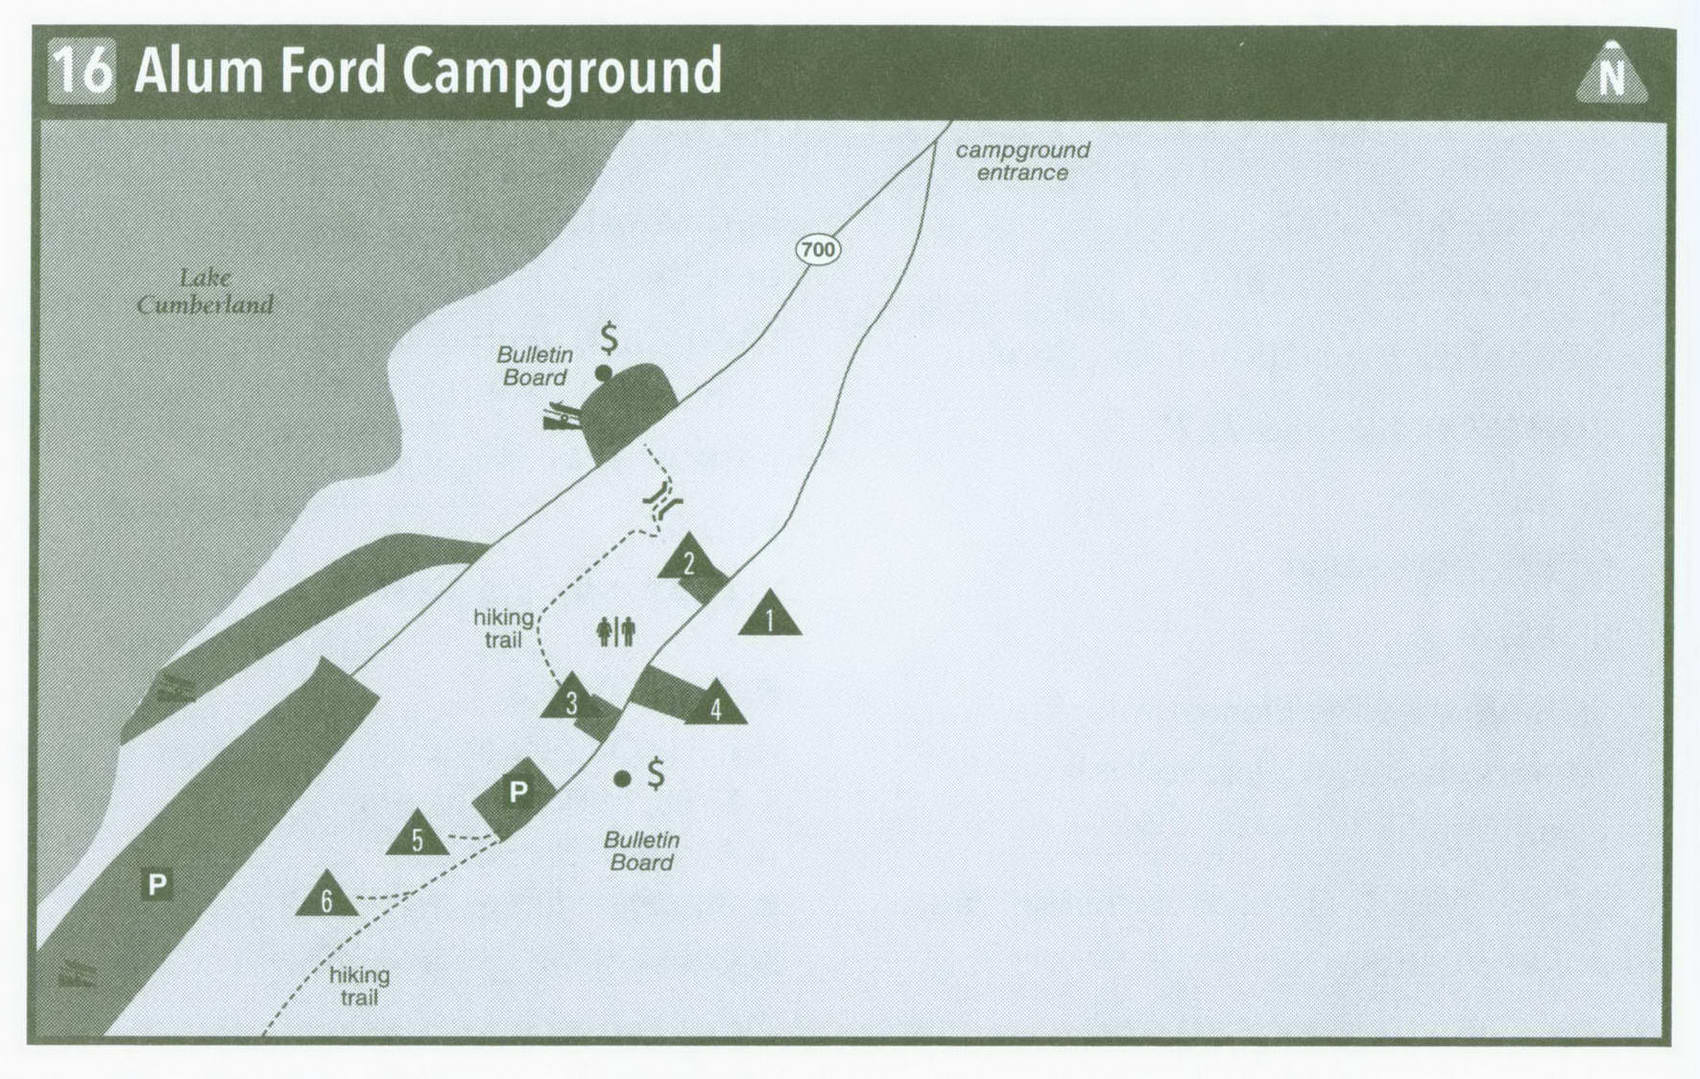 Plan of Alum Ford Campground